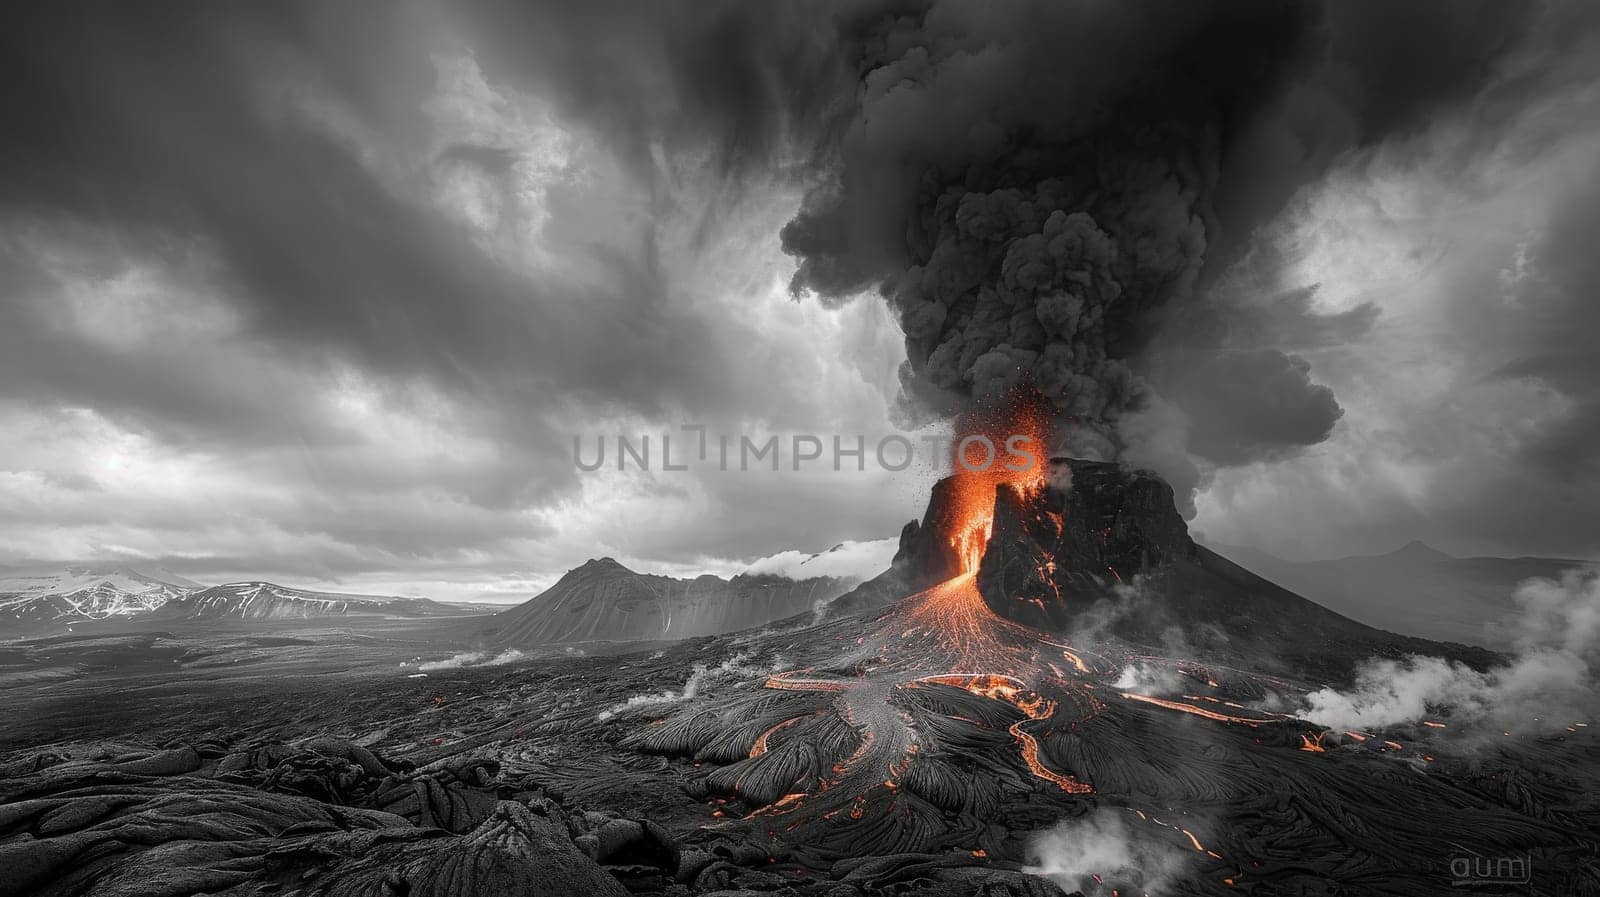 A black and white photo of a volcano with smoke and ash spewing from it. Scene is ominous and dramatic